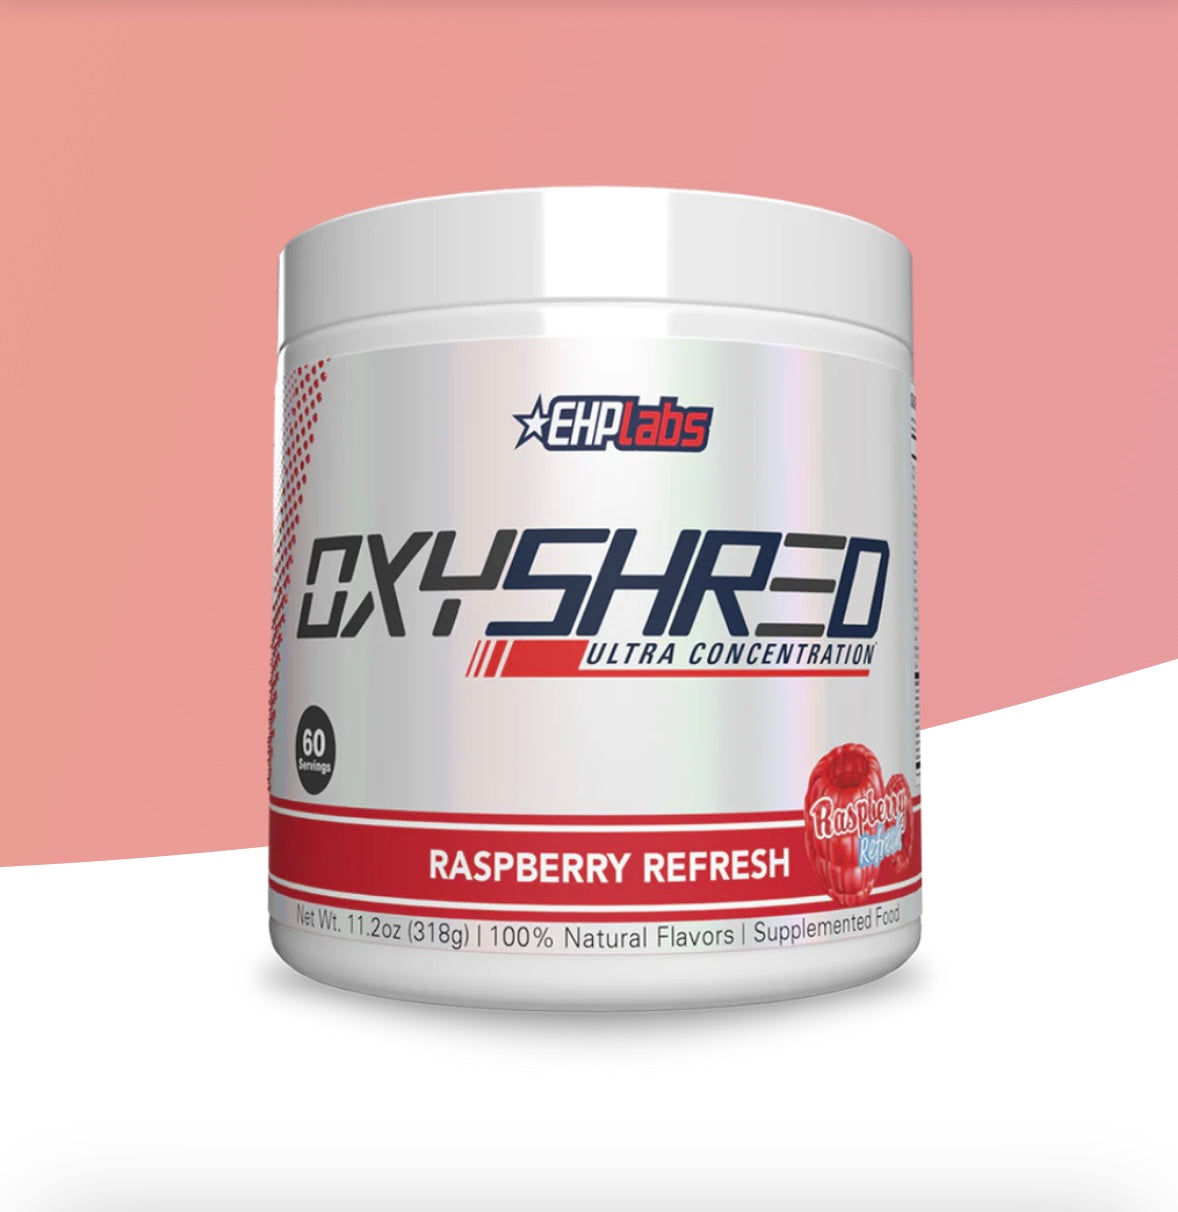 OxyShred Ultra Concentration - RASBERRY Refresh